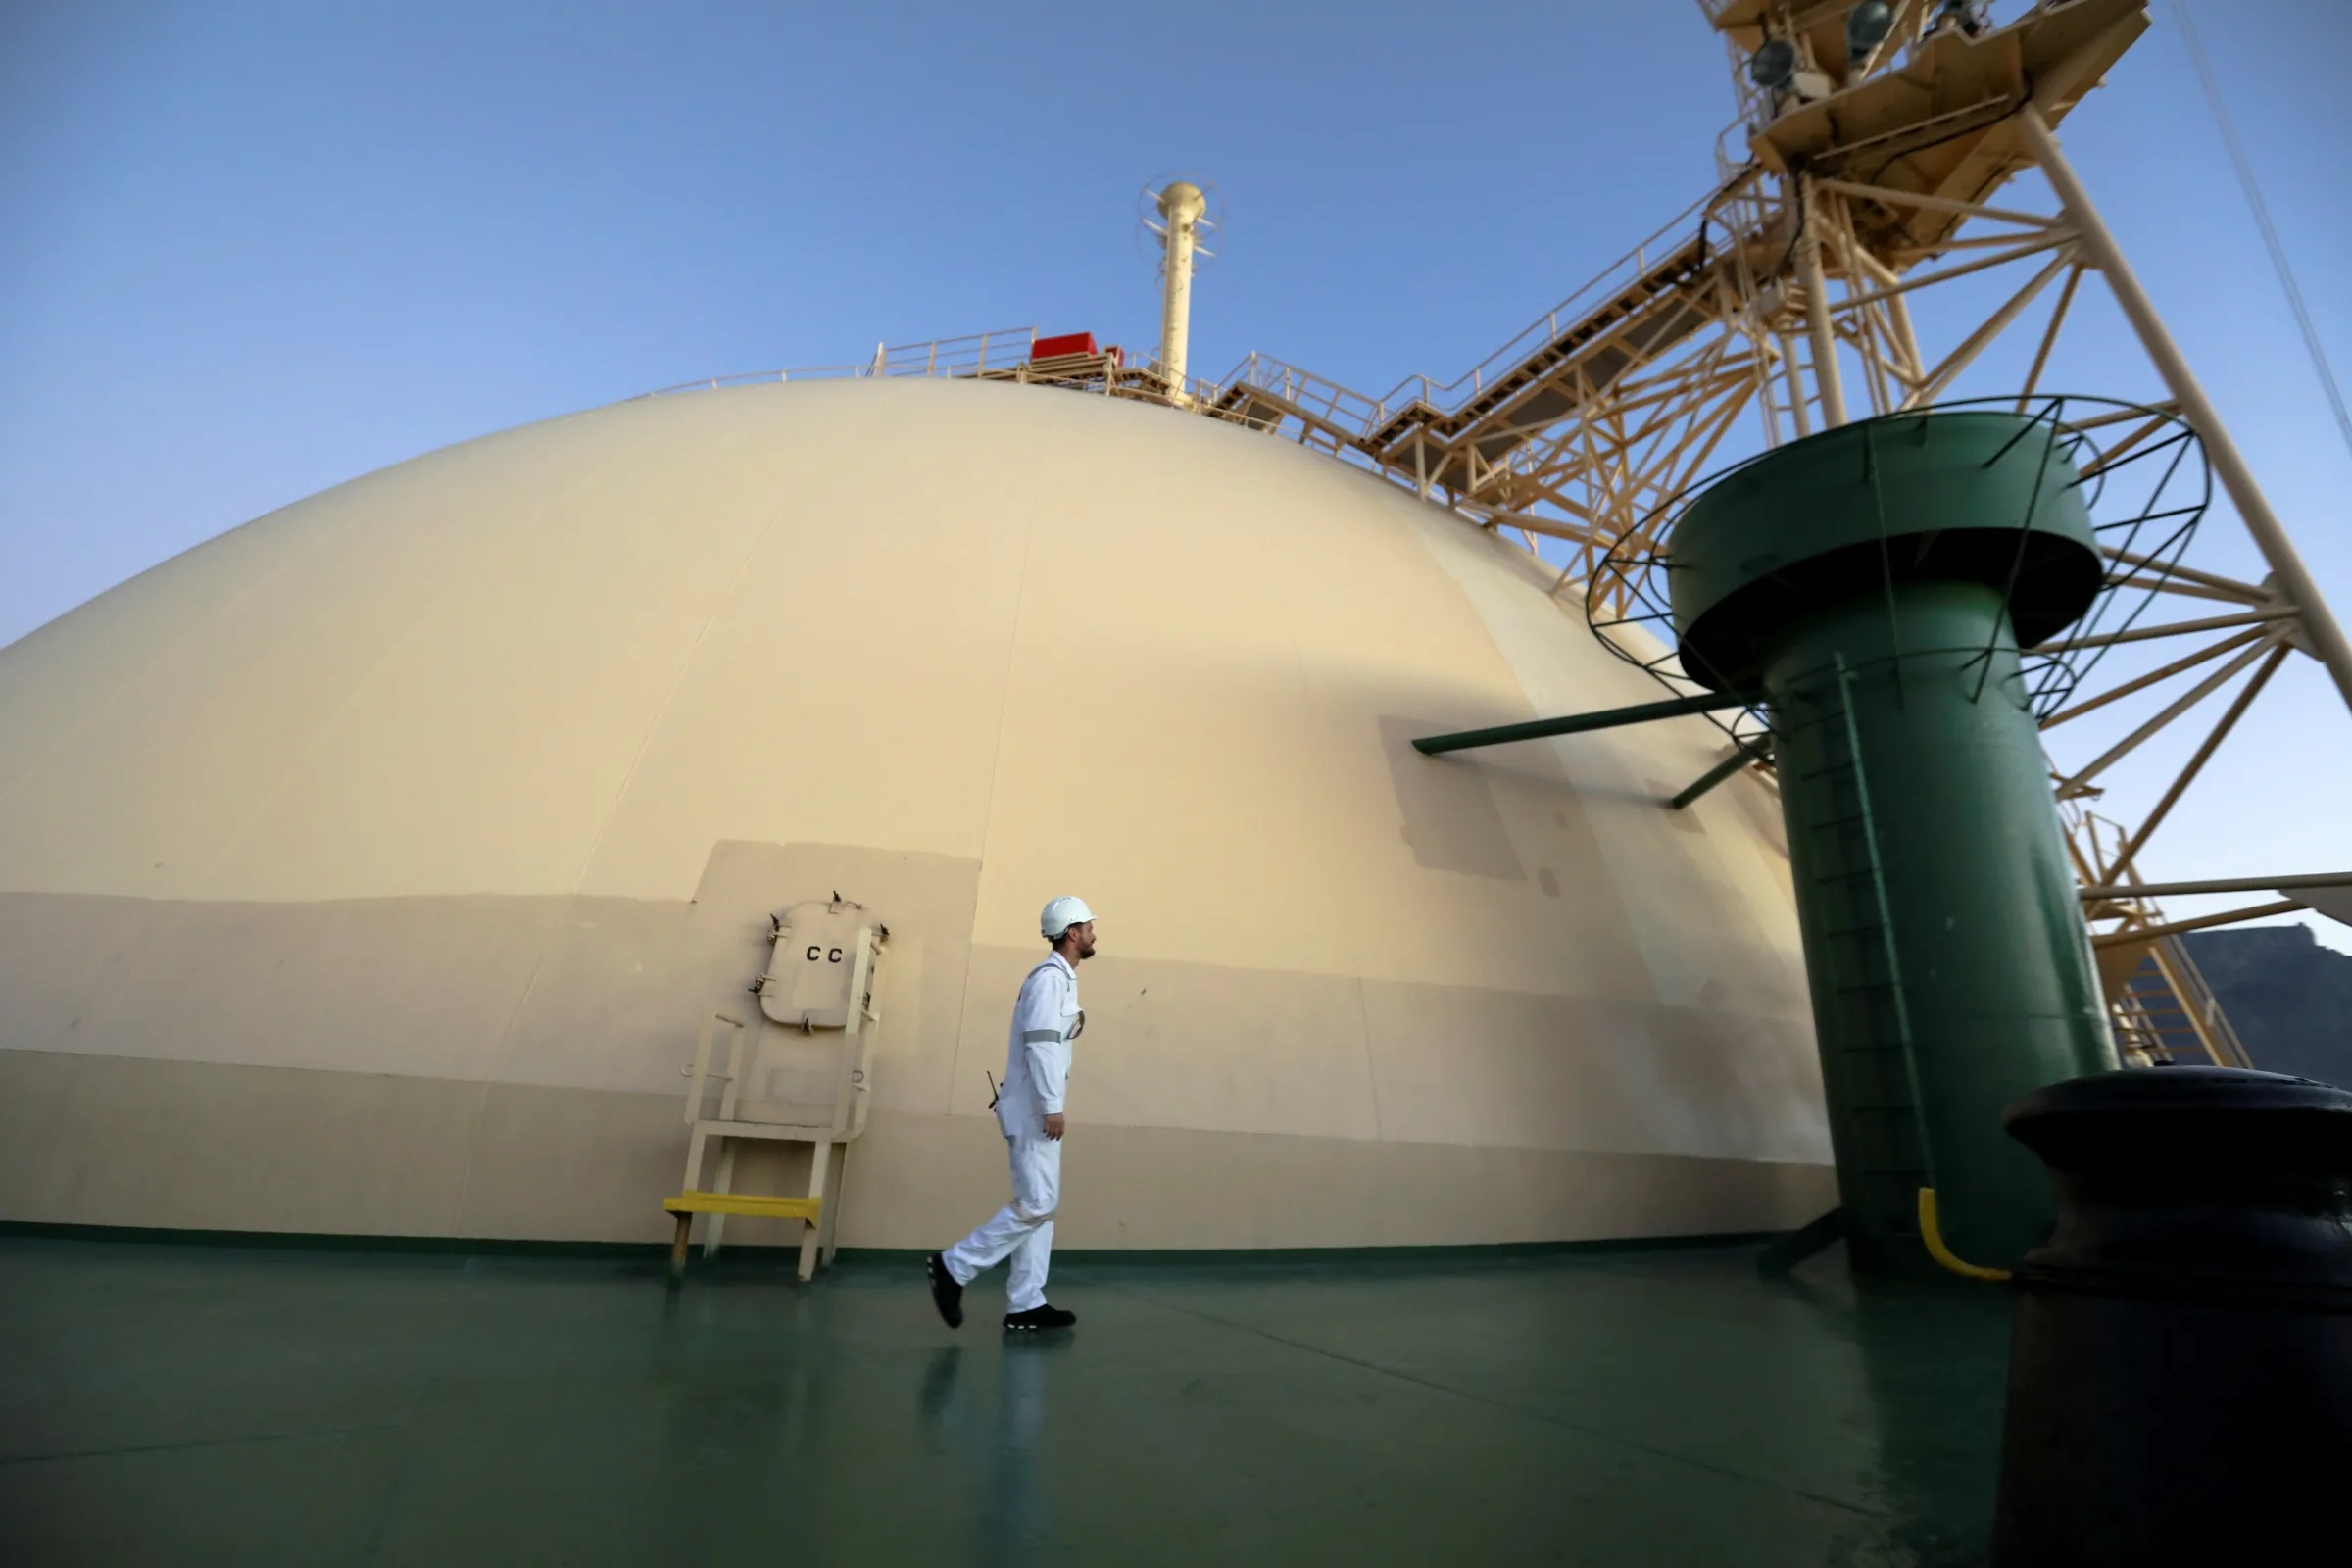 A worker walks past a dome holding liquefied natural gas, on the vessel KARMOL LNGT Powership Asia, one of 37 floating storage and regasification units (FSRU) in the world, as it docks at the Cape Town port en route to Brazil, in Cape Town, South Africa, April 19, 2022